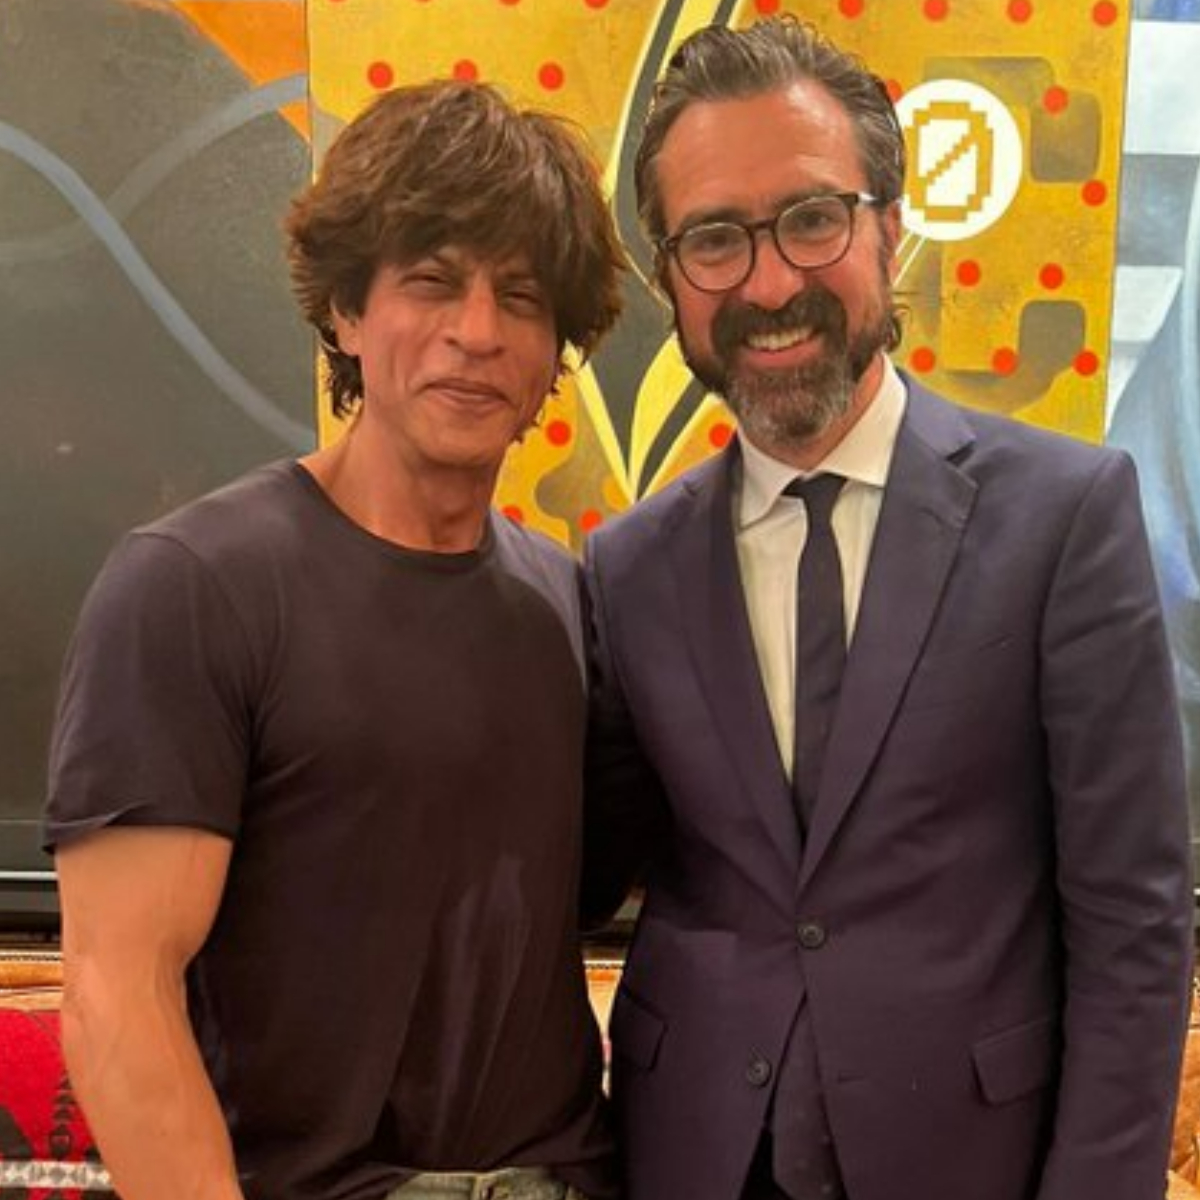 Shah Rukh Khan&#039;s latest photos with several dignitaries go viral, actor&#039;s appearance worries fans &amp; netizens  